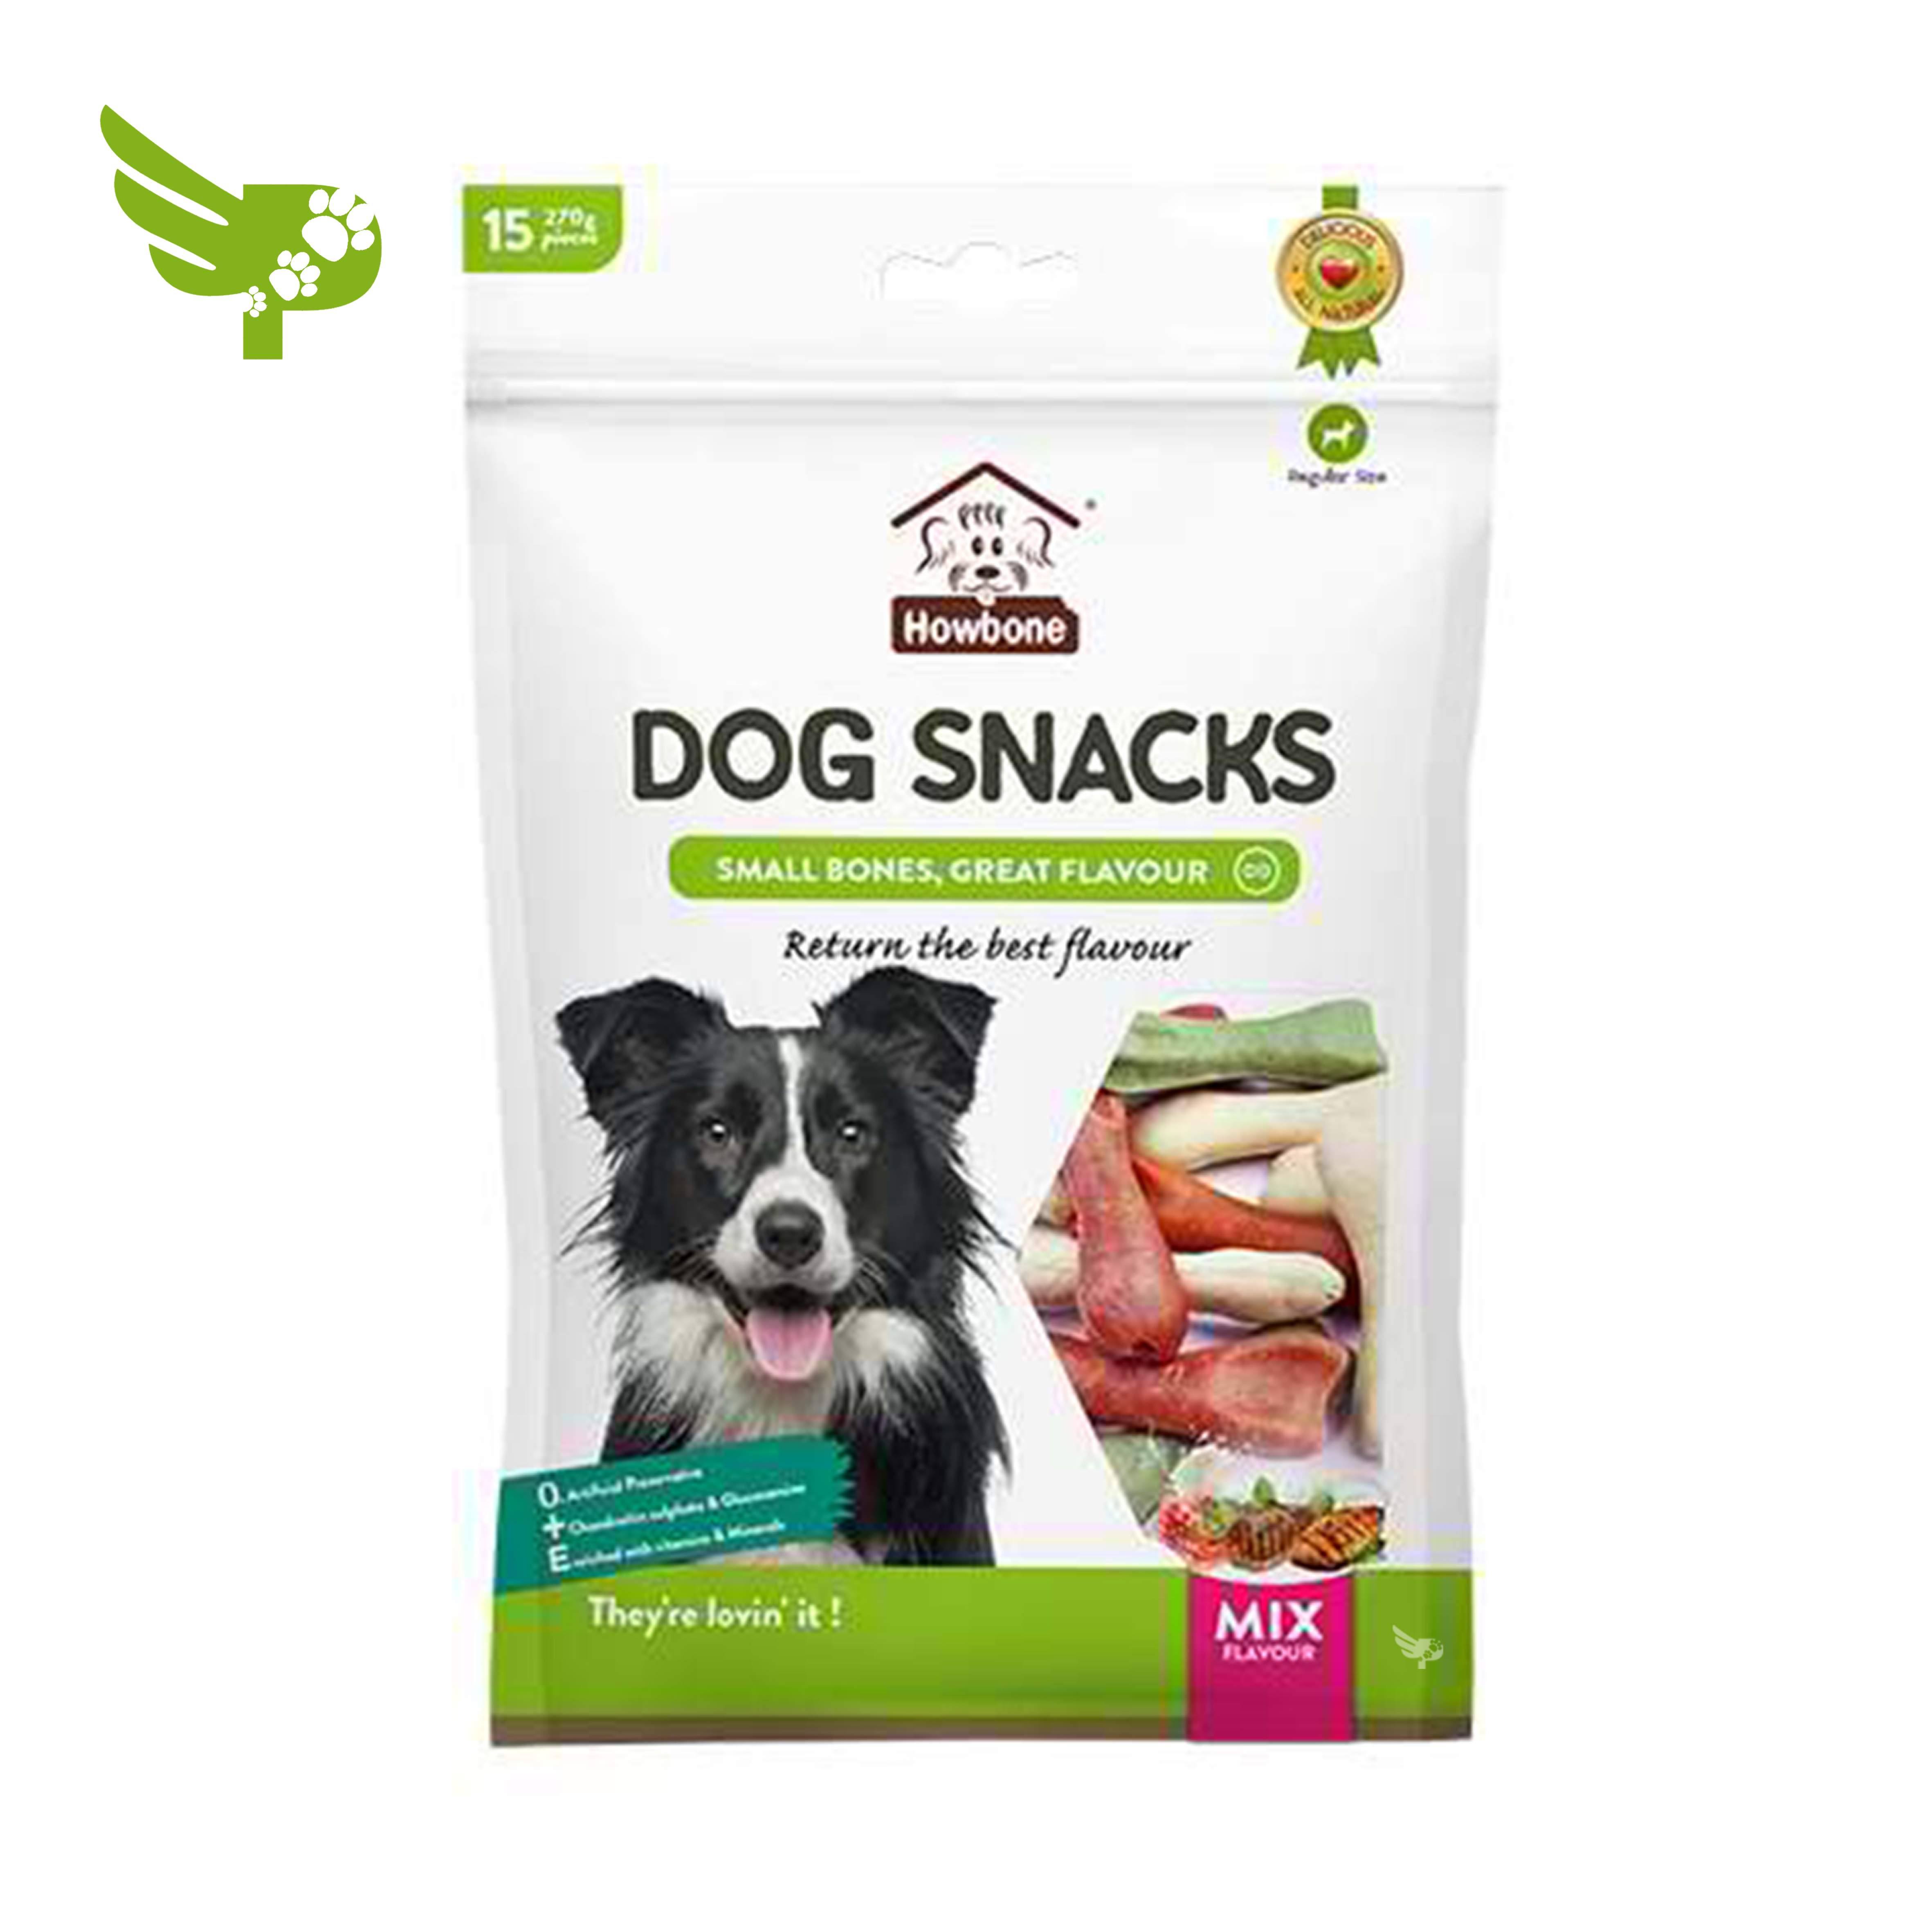 Howbone Mix Flavour Dog Snacks - 15 pieces/pack